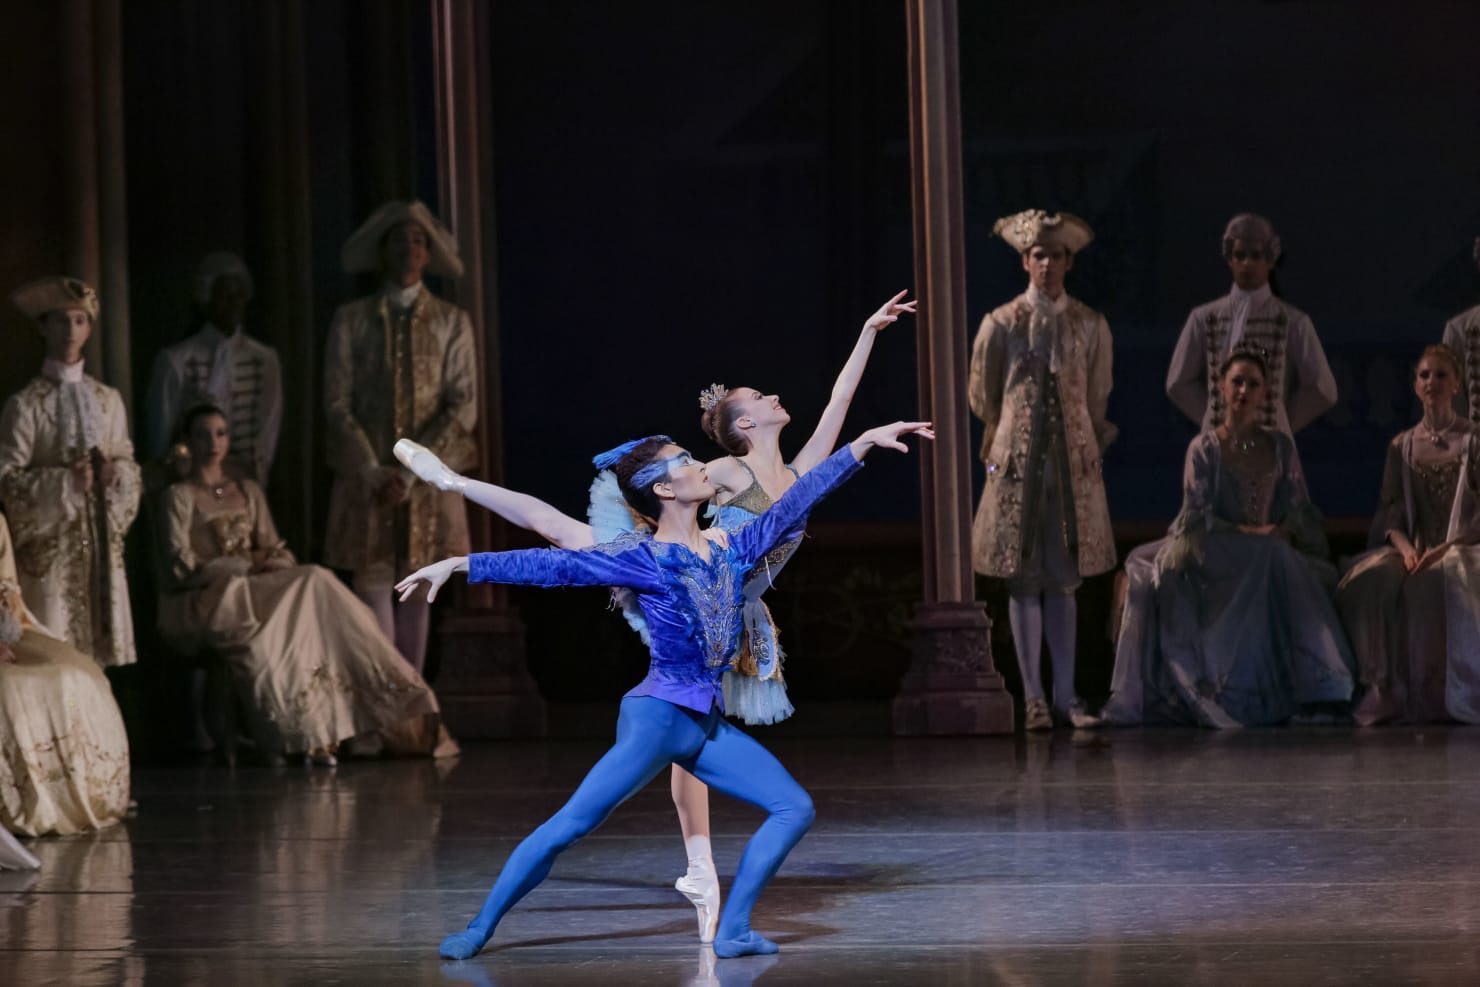 At Chaumet, Rousing 'a Sleeping Beauty' - The New York Times